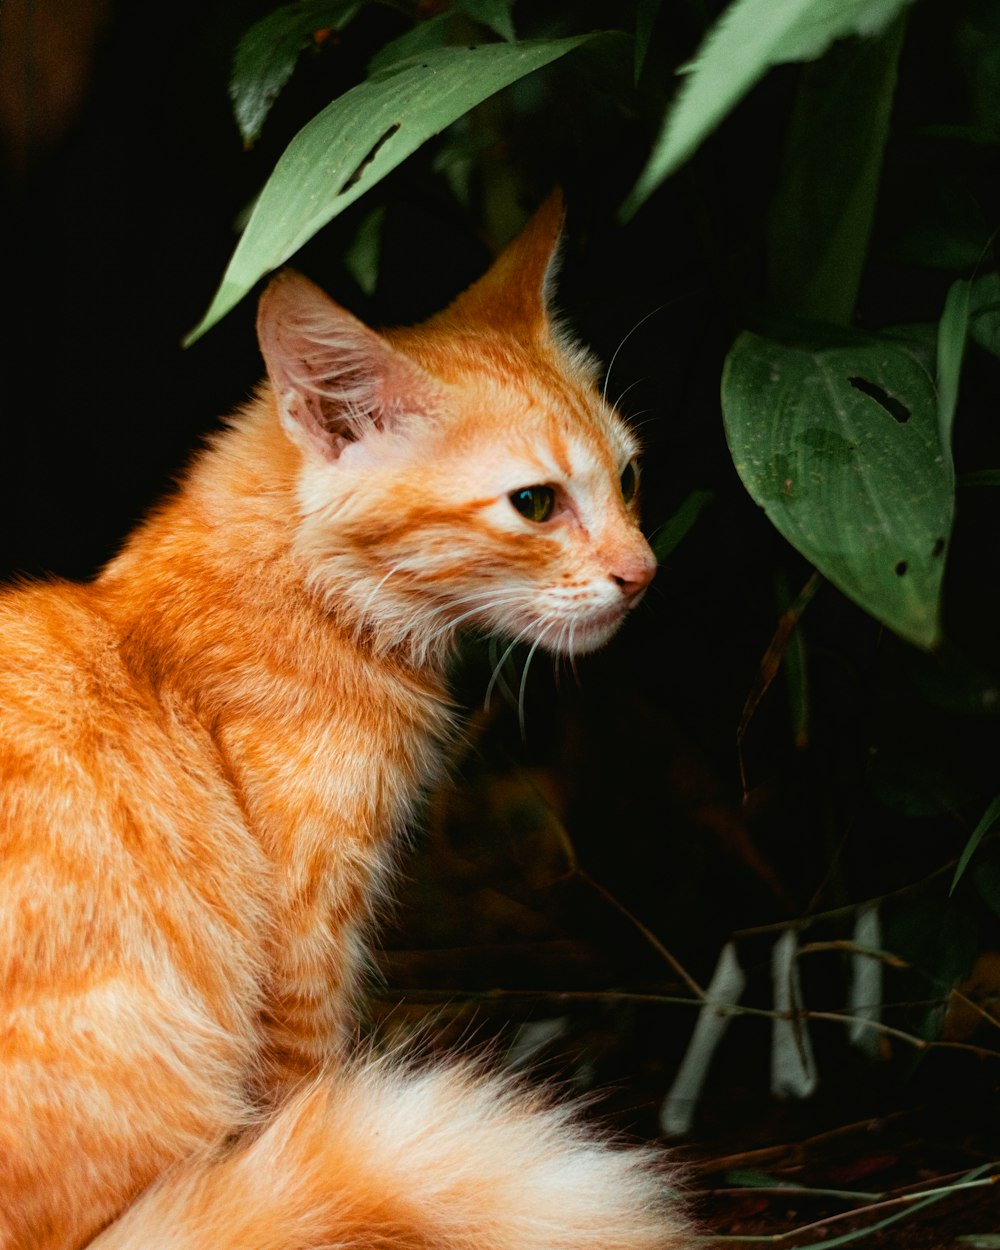 a close up of a cat near a plant